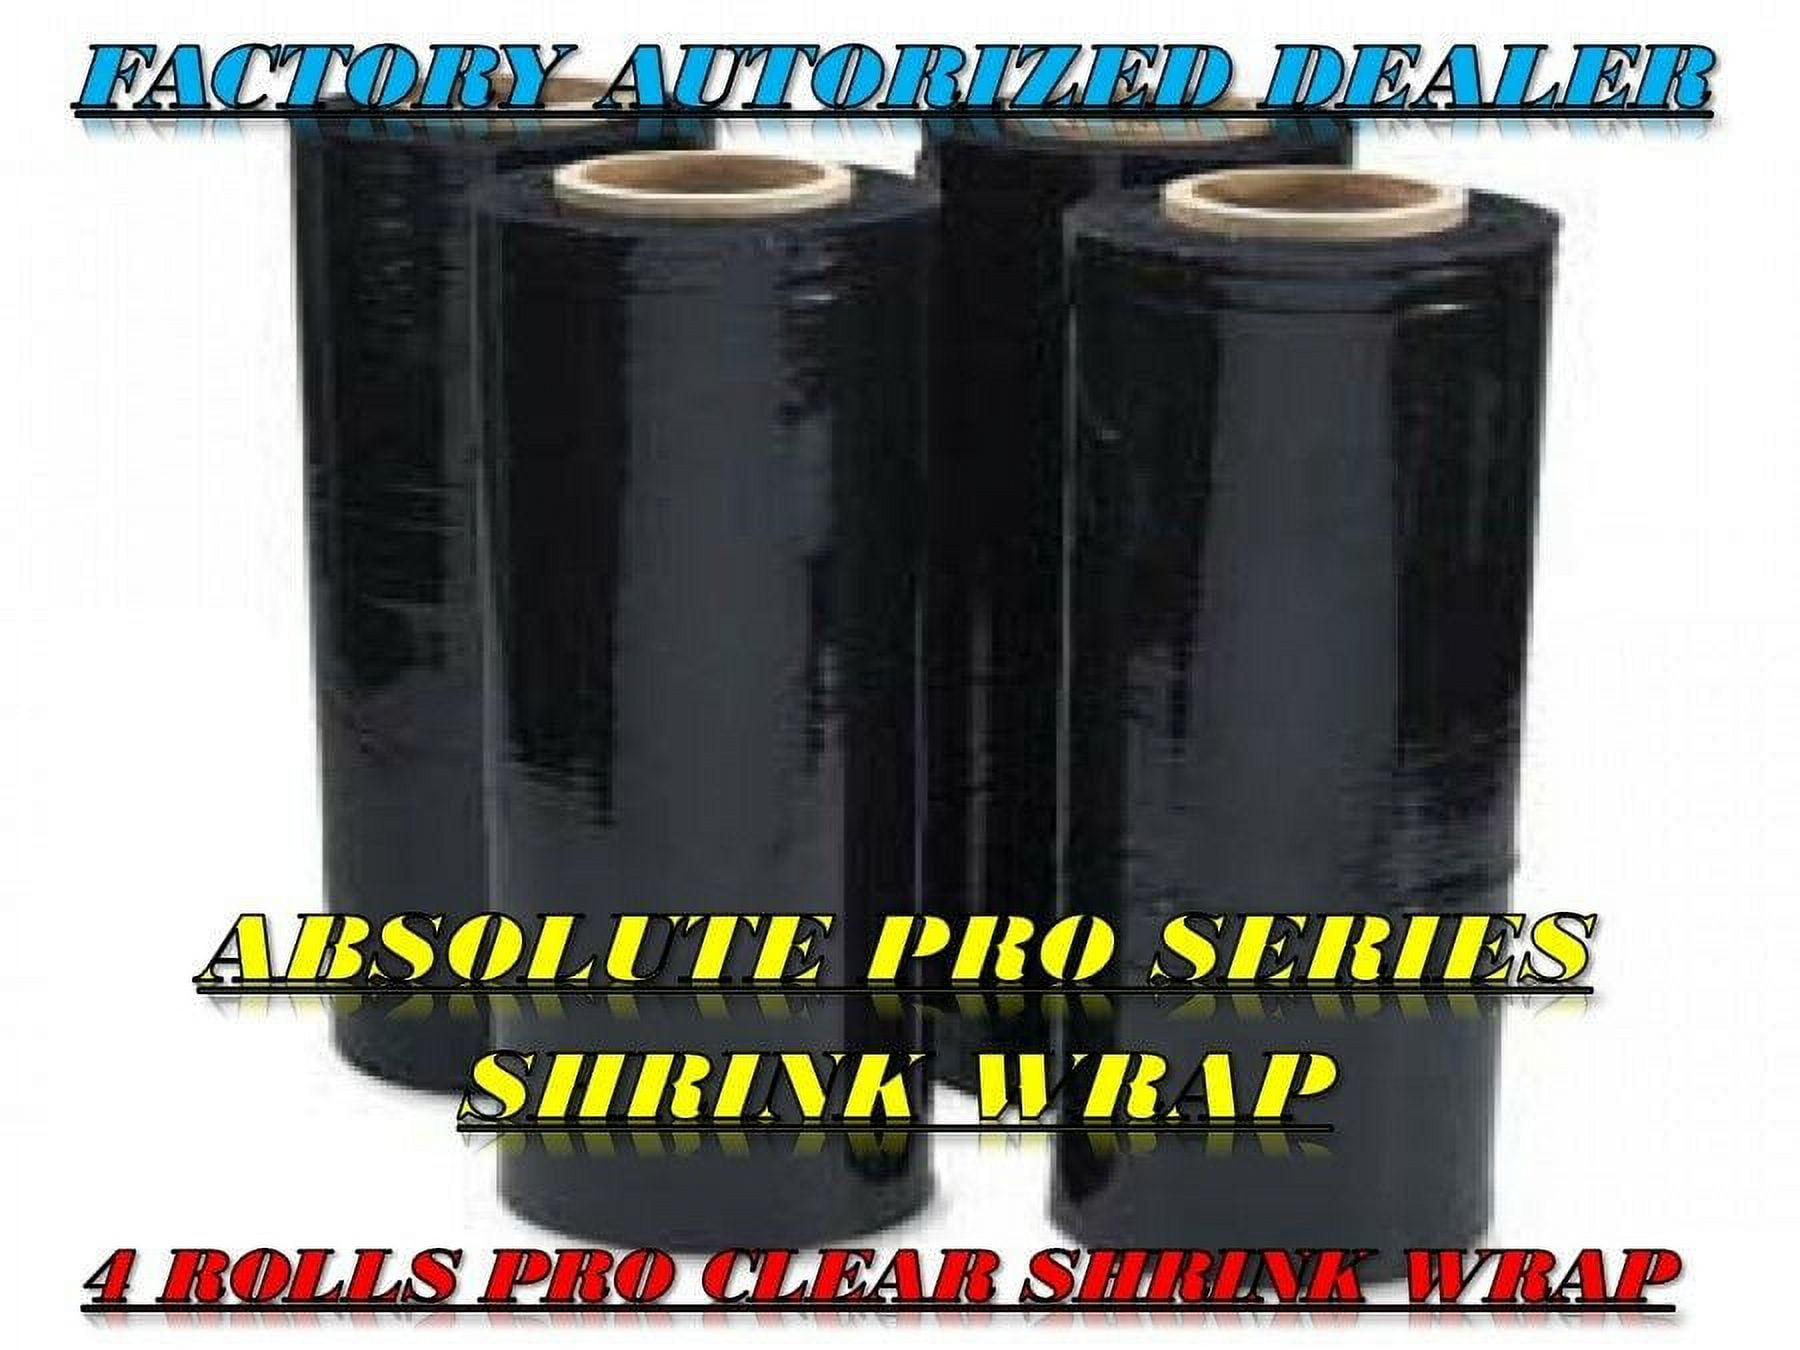 Magic Wand Shrink Wrap System - 18 - (Slightly backordered and